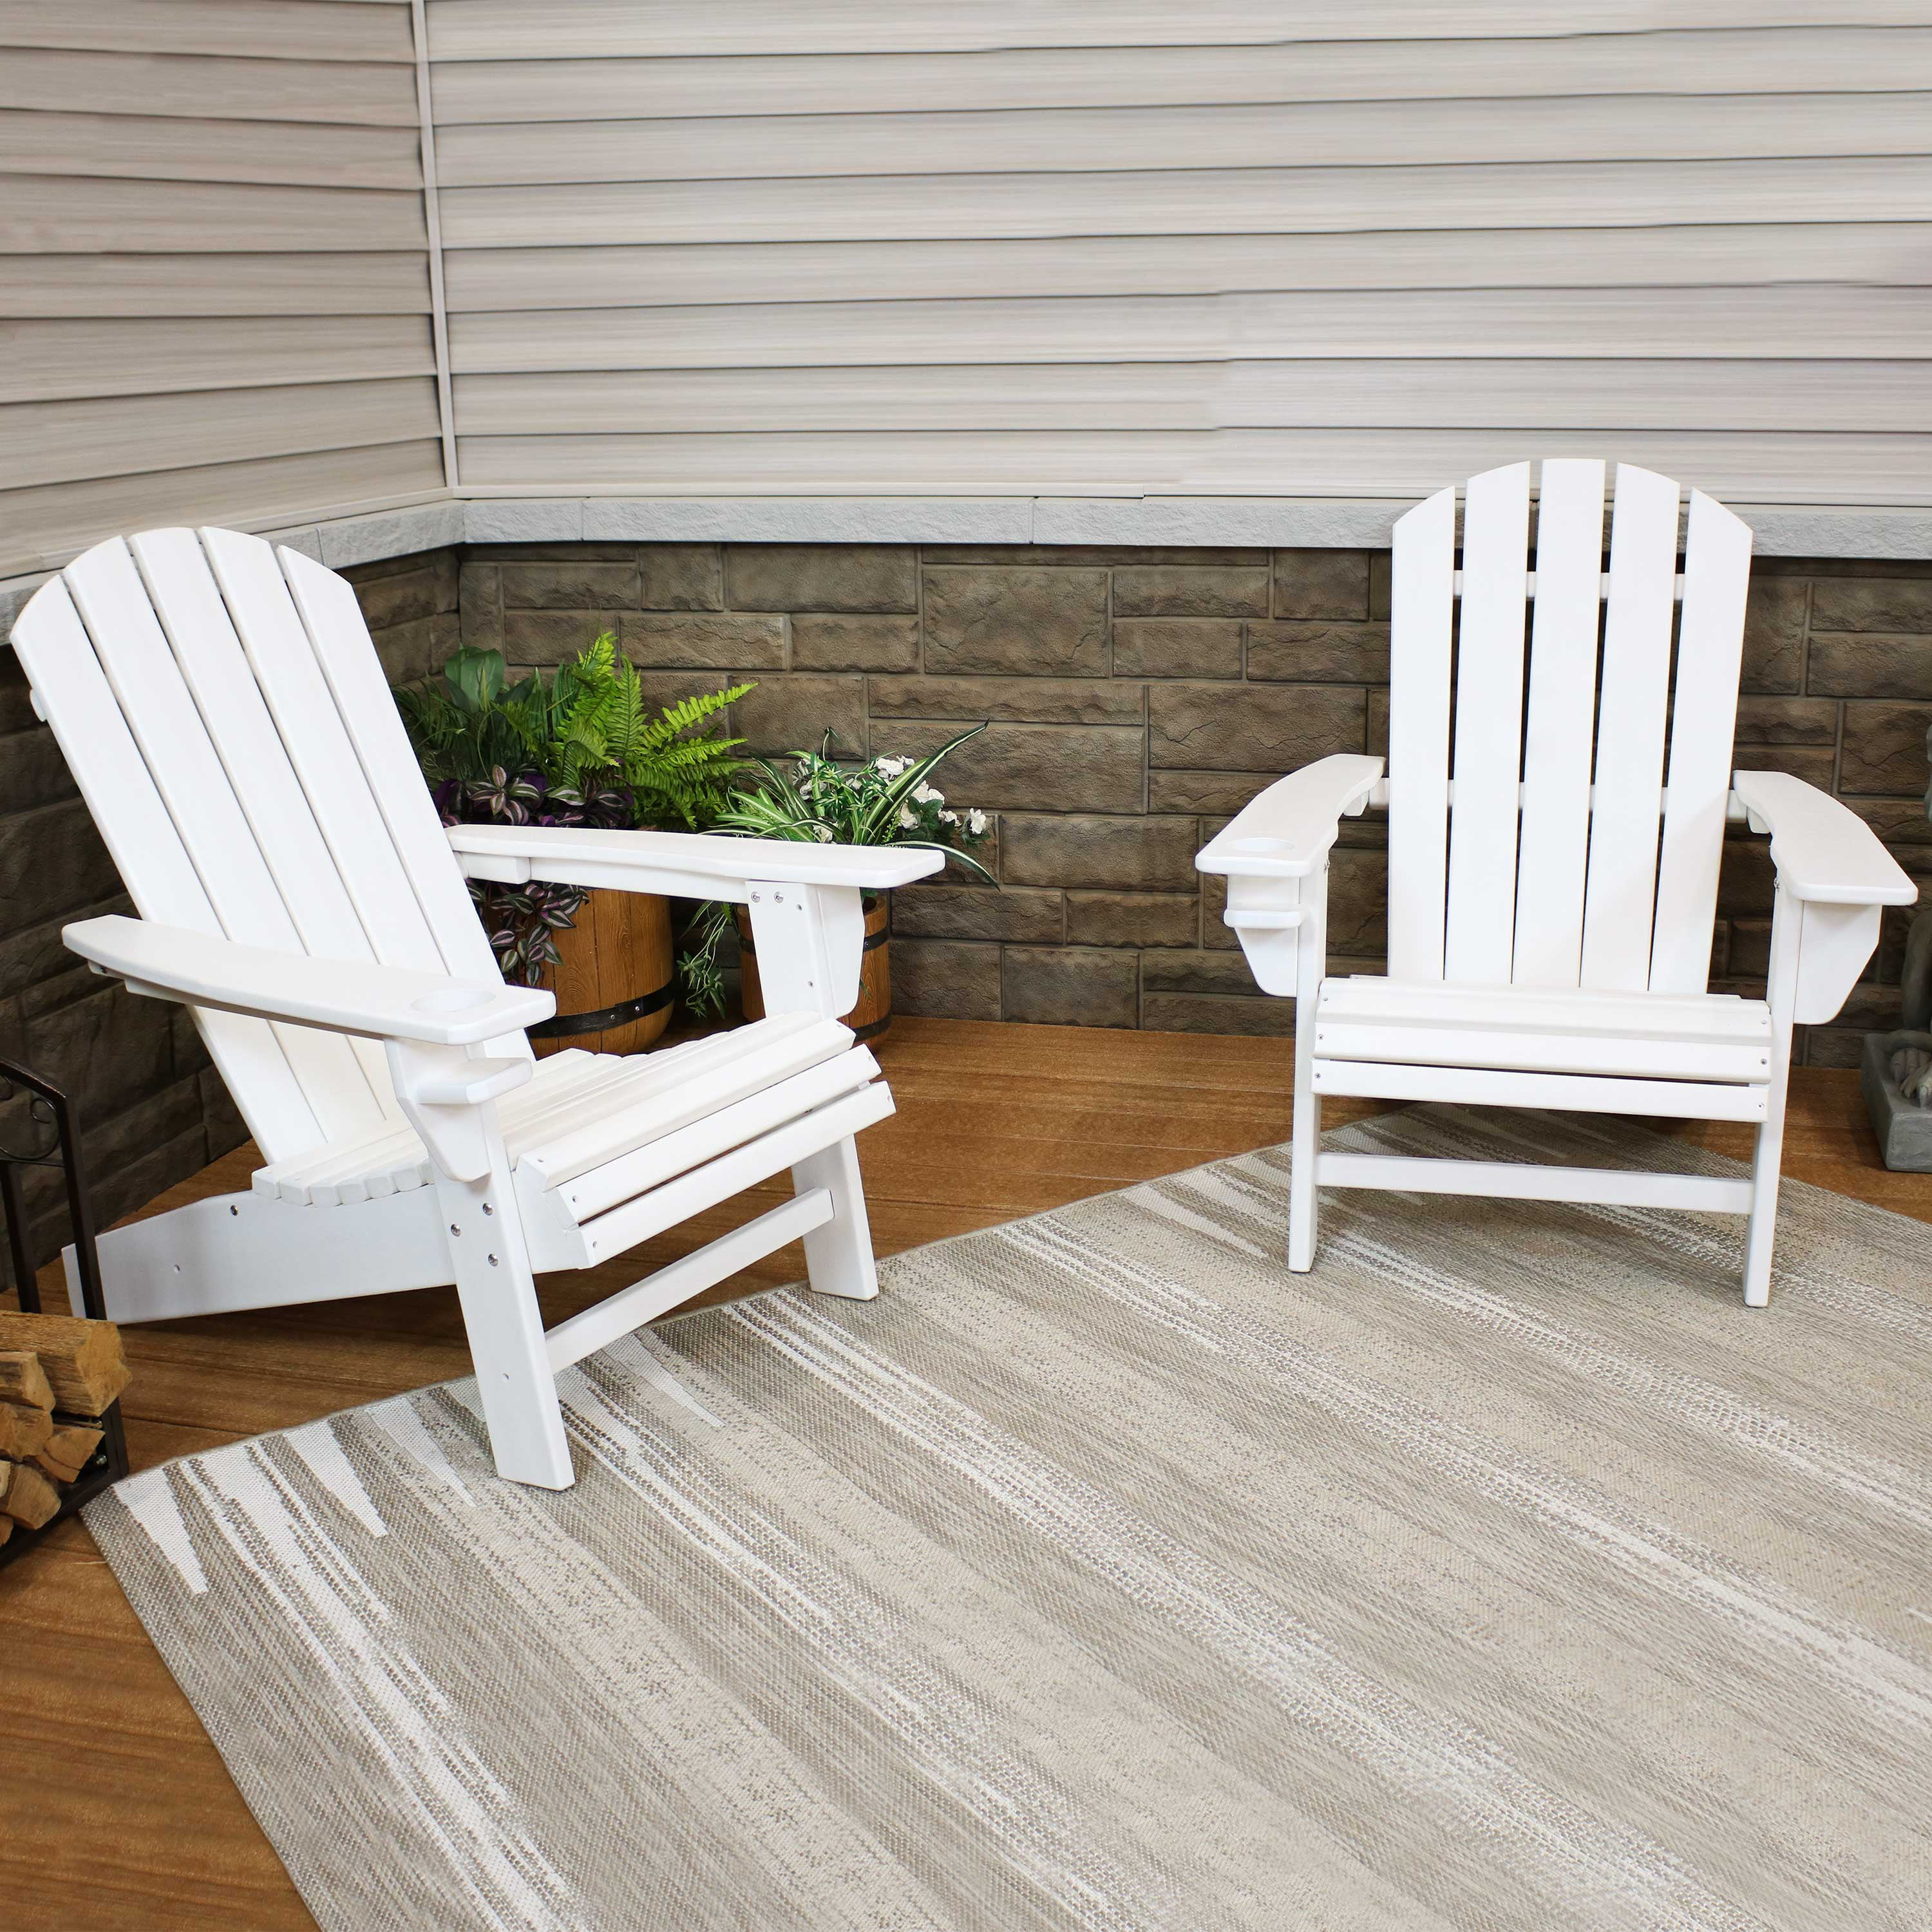 Sunnydaze All-Weather White/Black Outdoor Adirondack Chair with Drink Holder Ideal for Lawn and Around The Firepit Garden Heavy Duty HDPE Weatherproof Patio Chair 